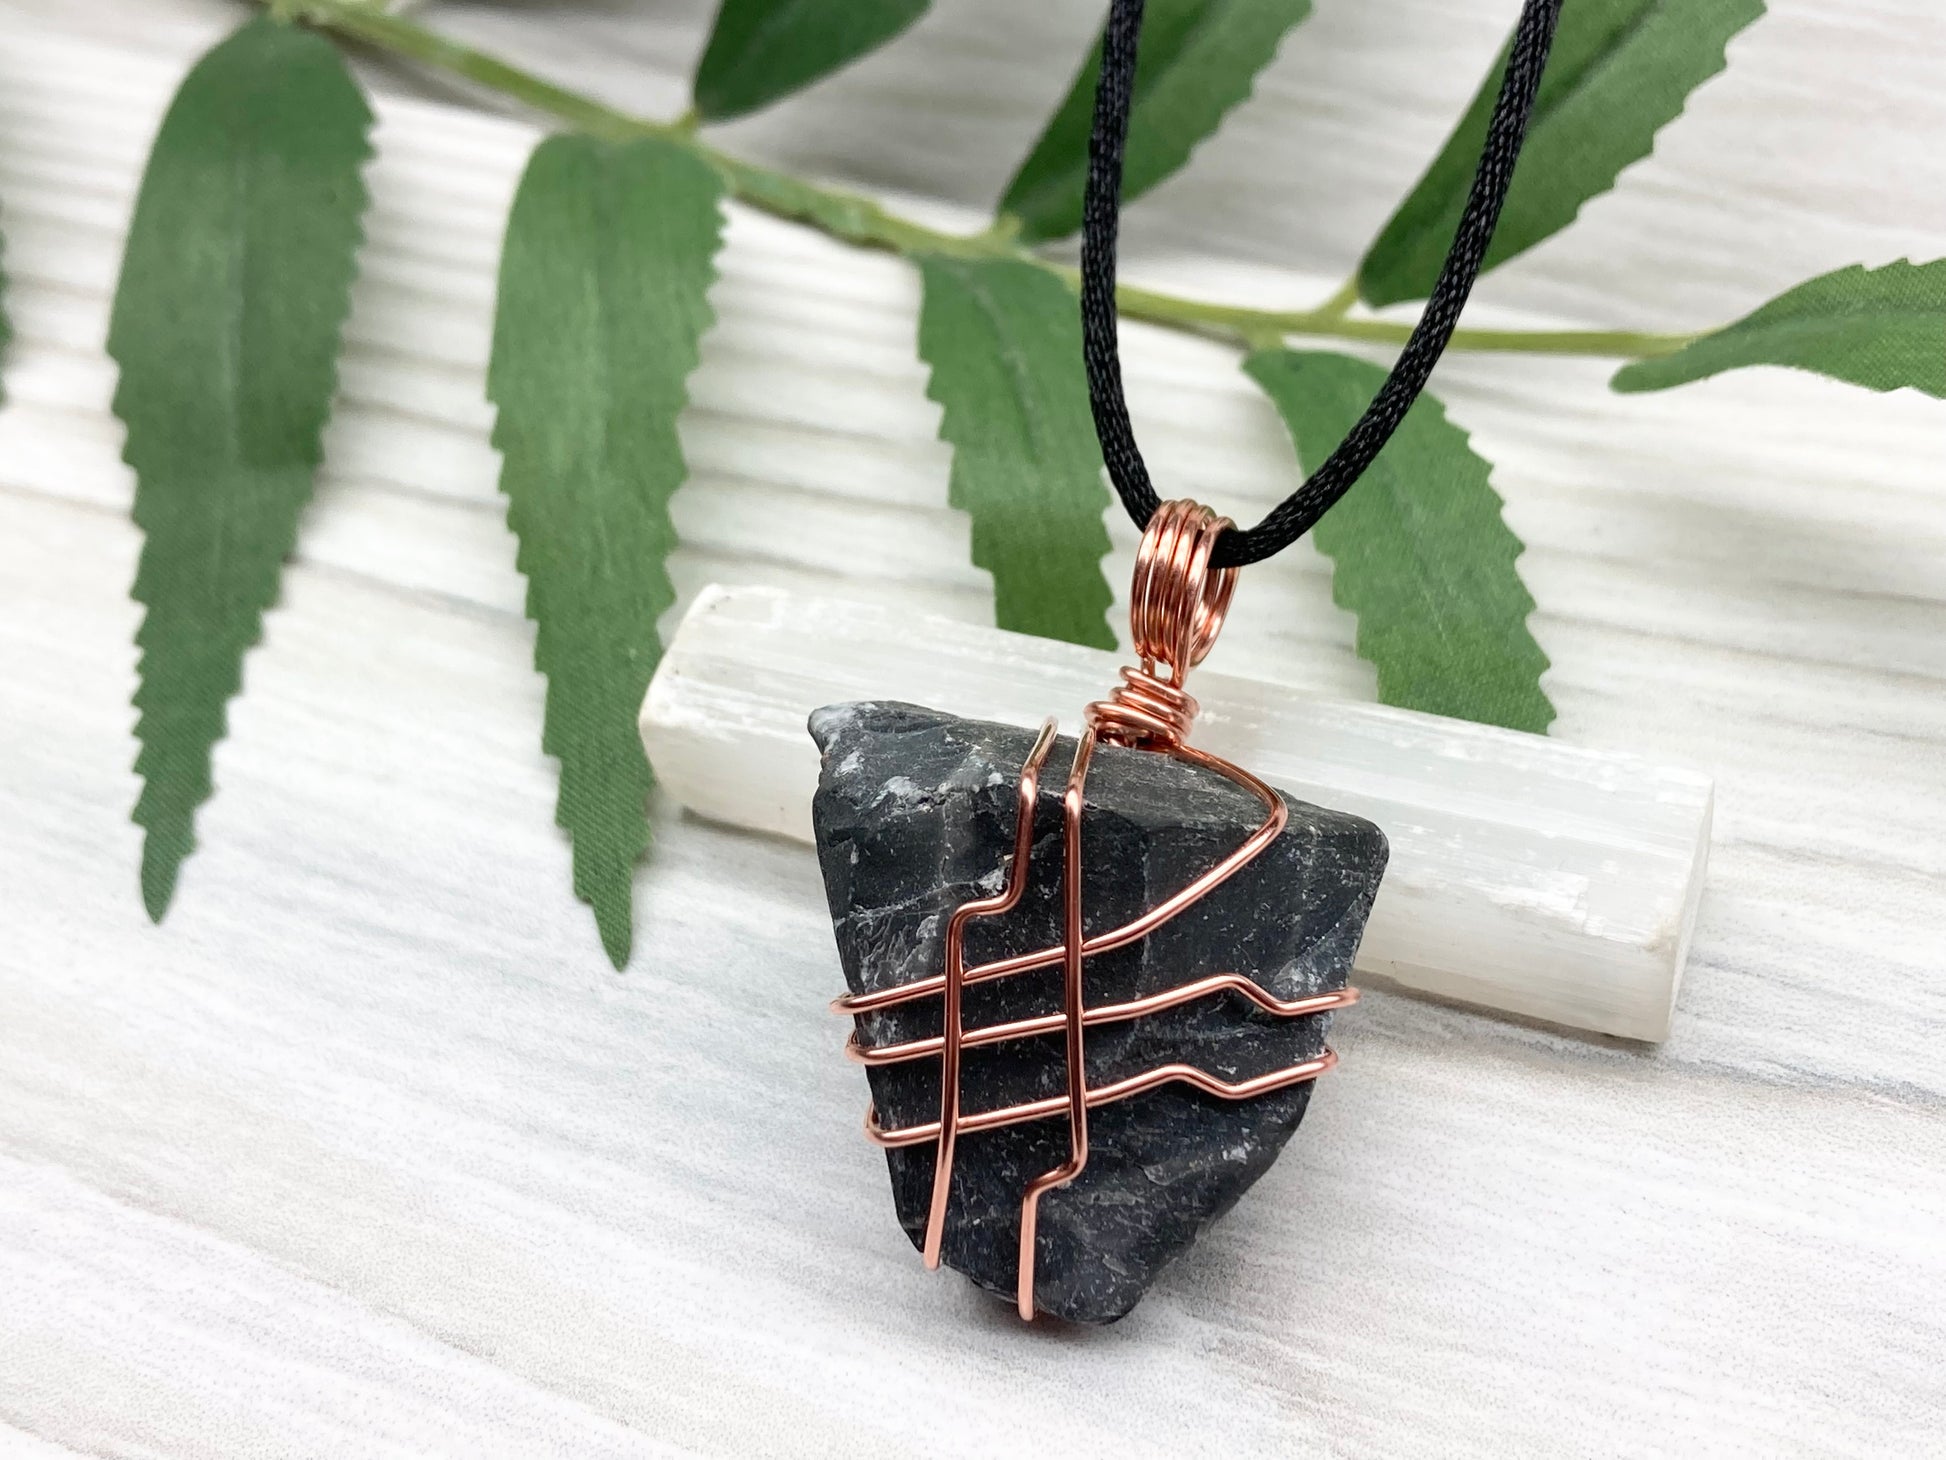 Raw Black Onyx Necklace. Rough Crystal Wrapped With Copper Wire. Comes On A Black Chain. New Age Boho Style Jewelry.